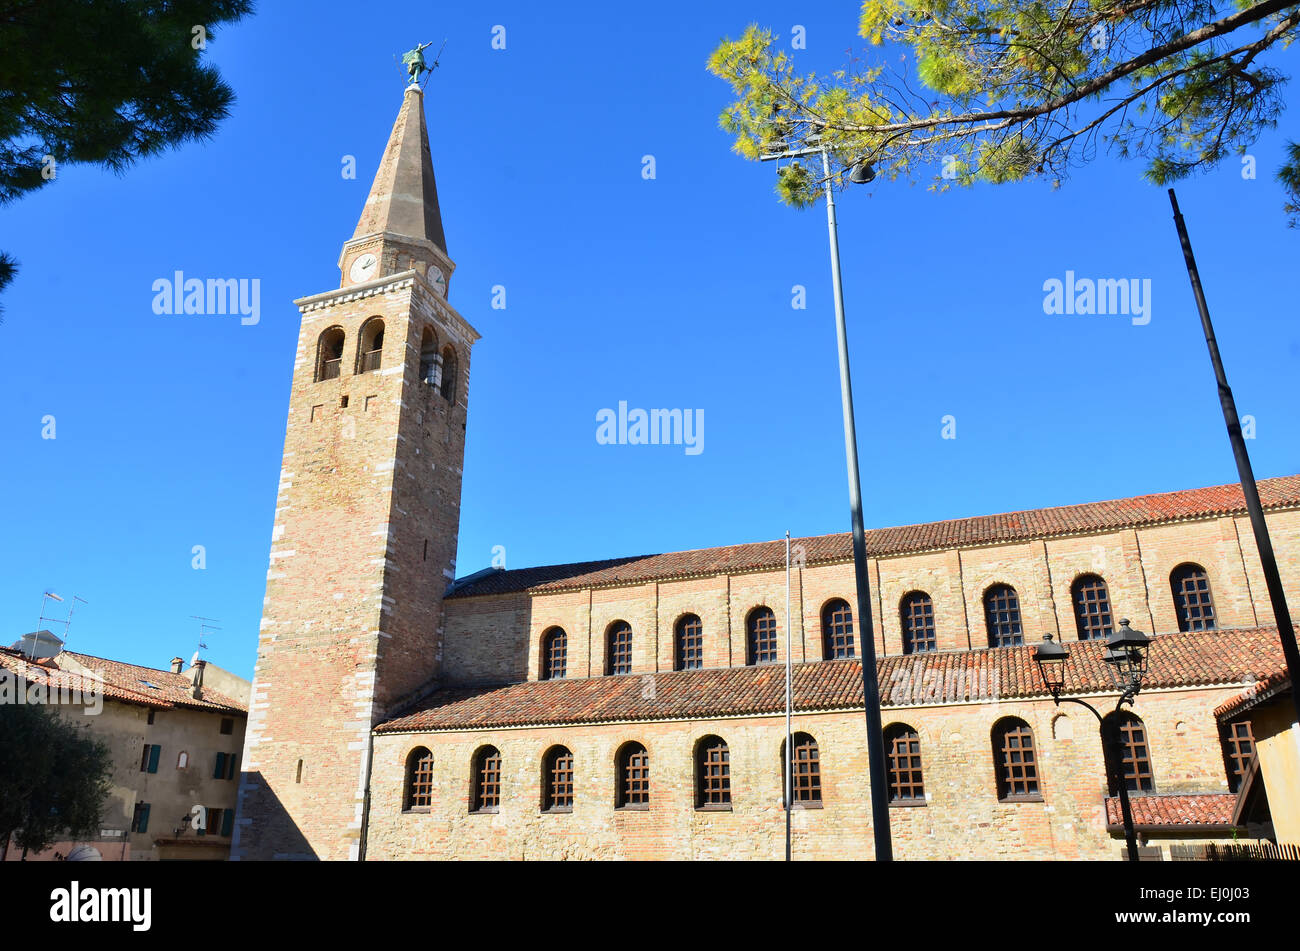 The ancient roman basilica of Saint Euphemia in Grado Italy. The clock tower is surmounted by the archangel Michael Stock Photo